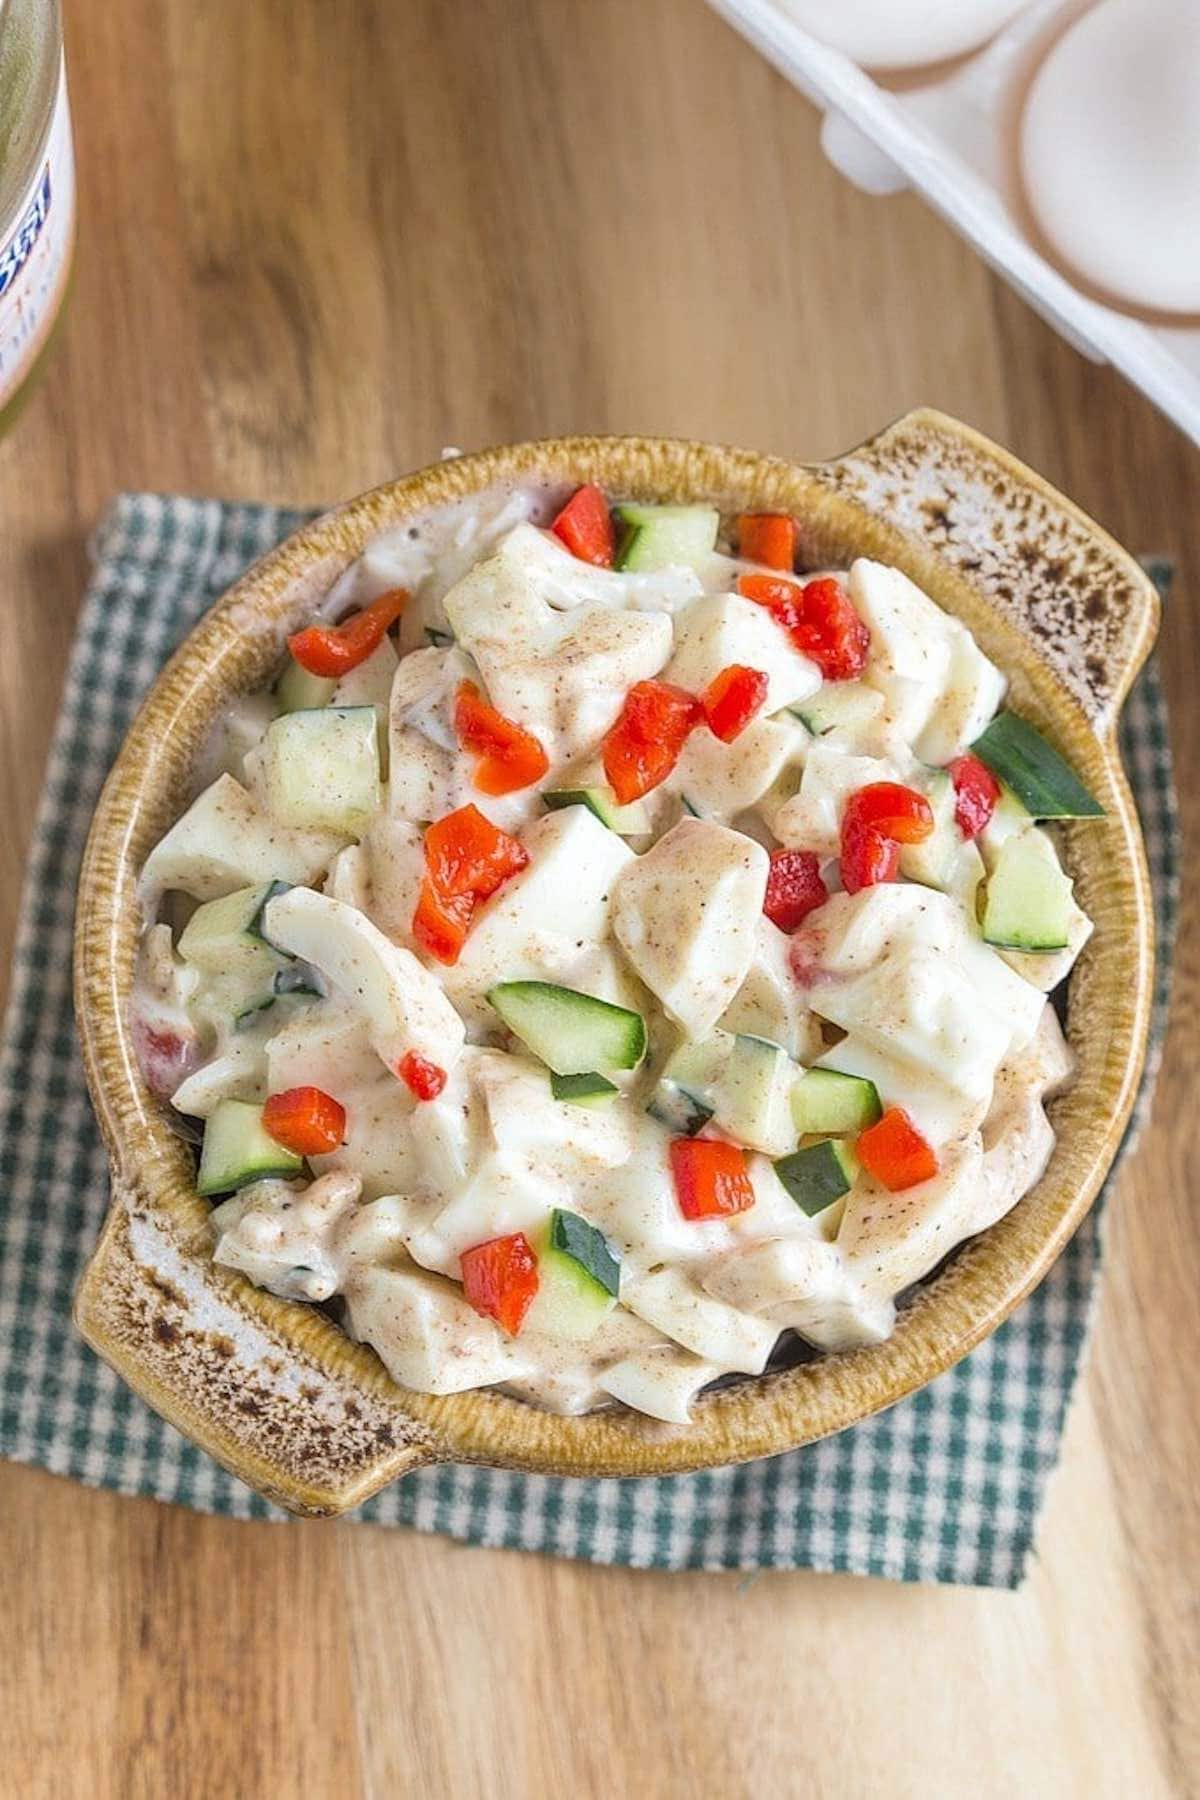 egg white salad with roasted red peppers and cucumber slices on top.